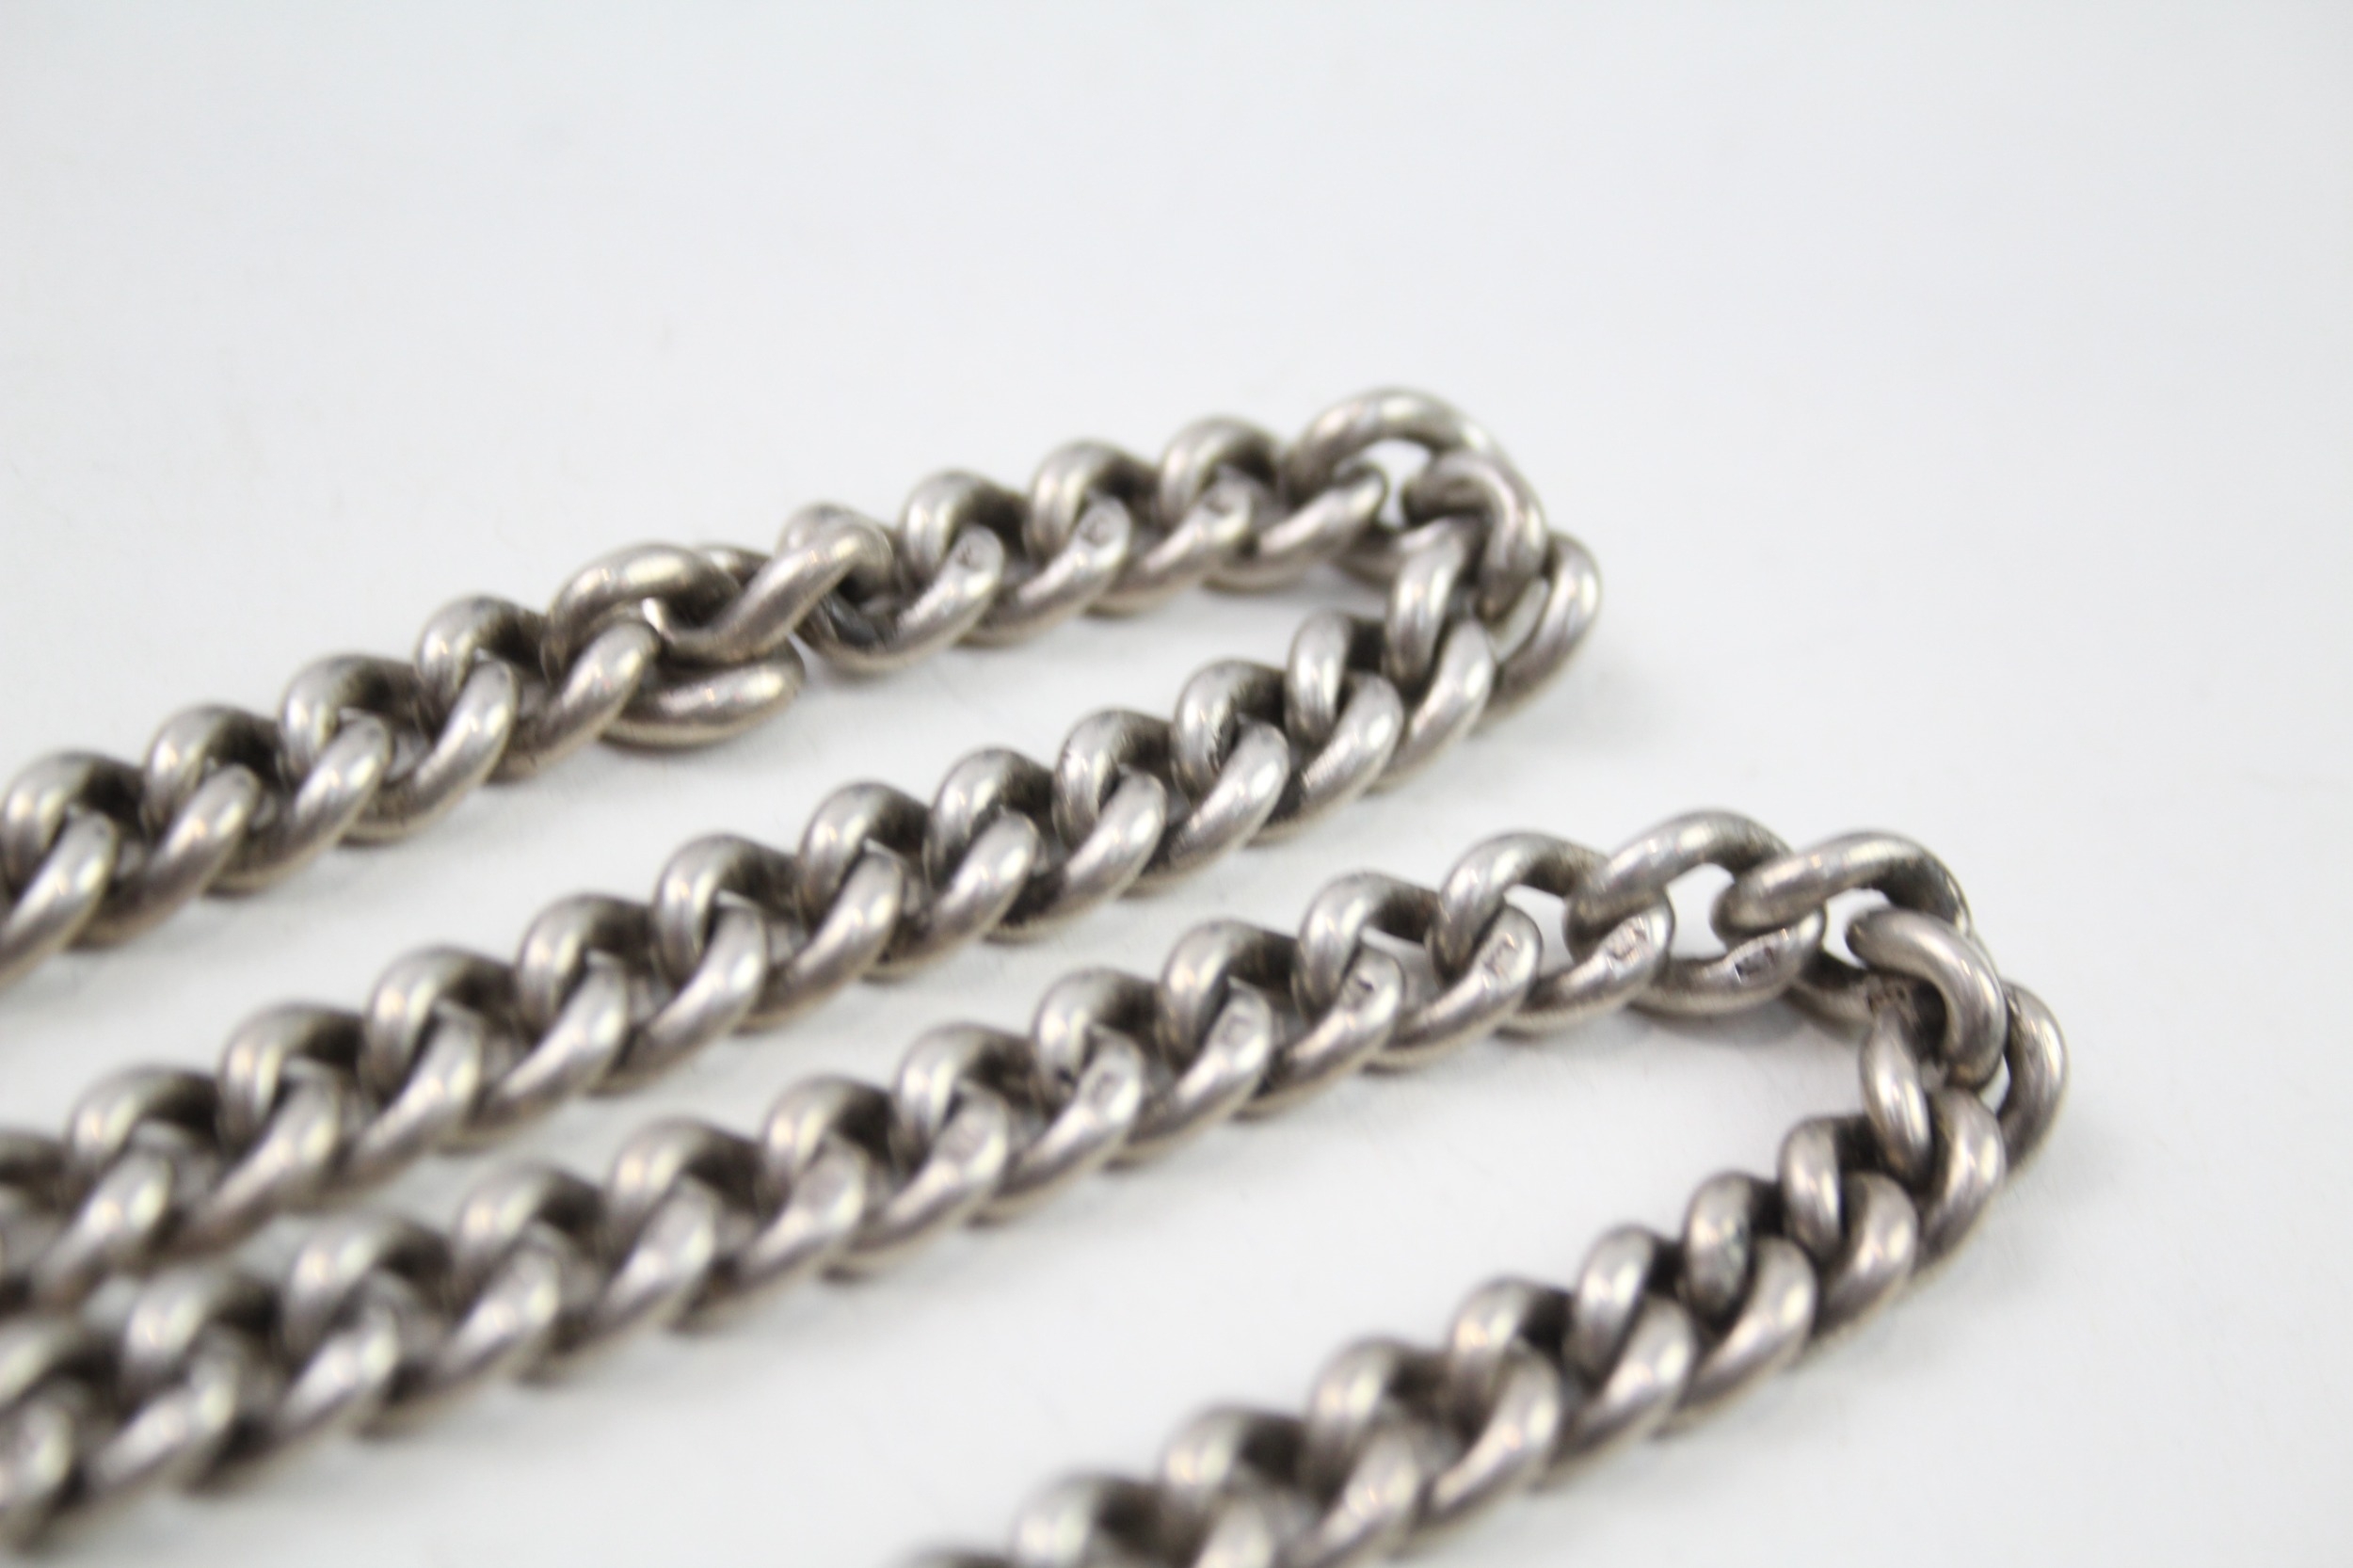 Silver antique watch chain with fob (68g) - Image 4 of 7